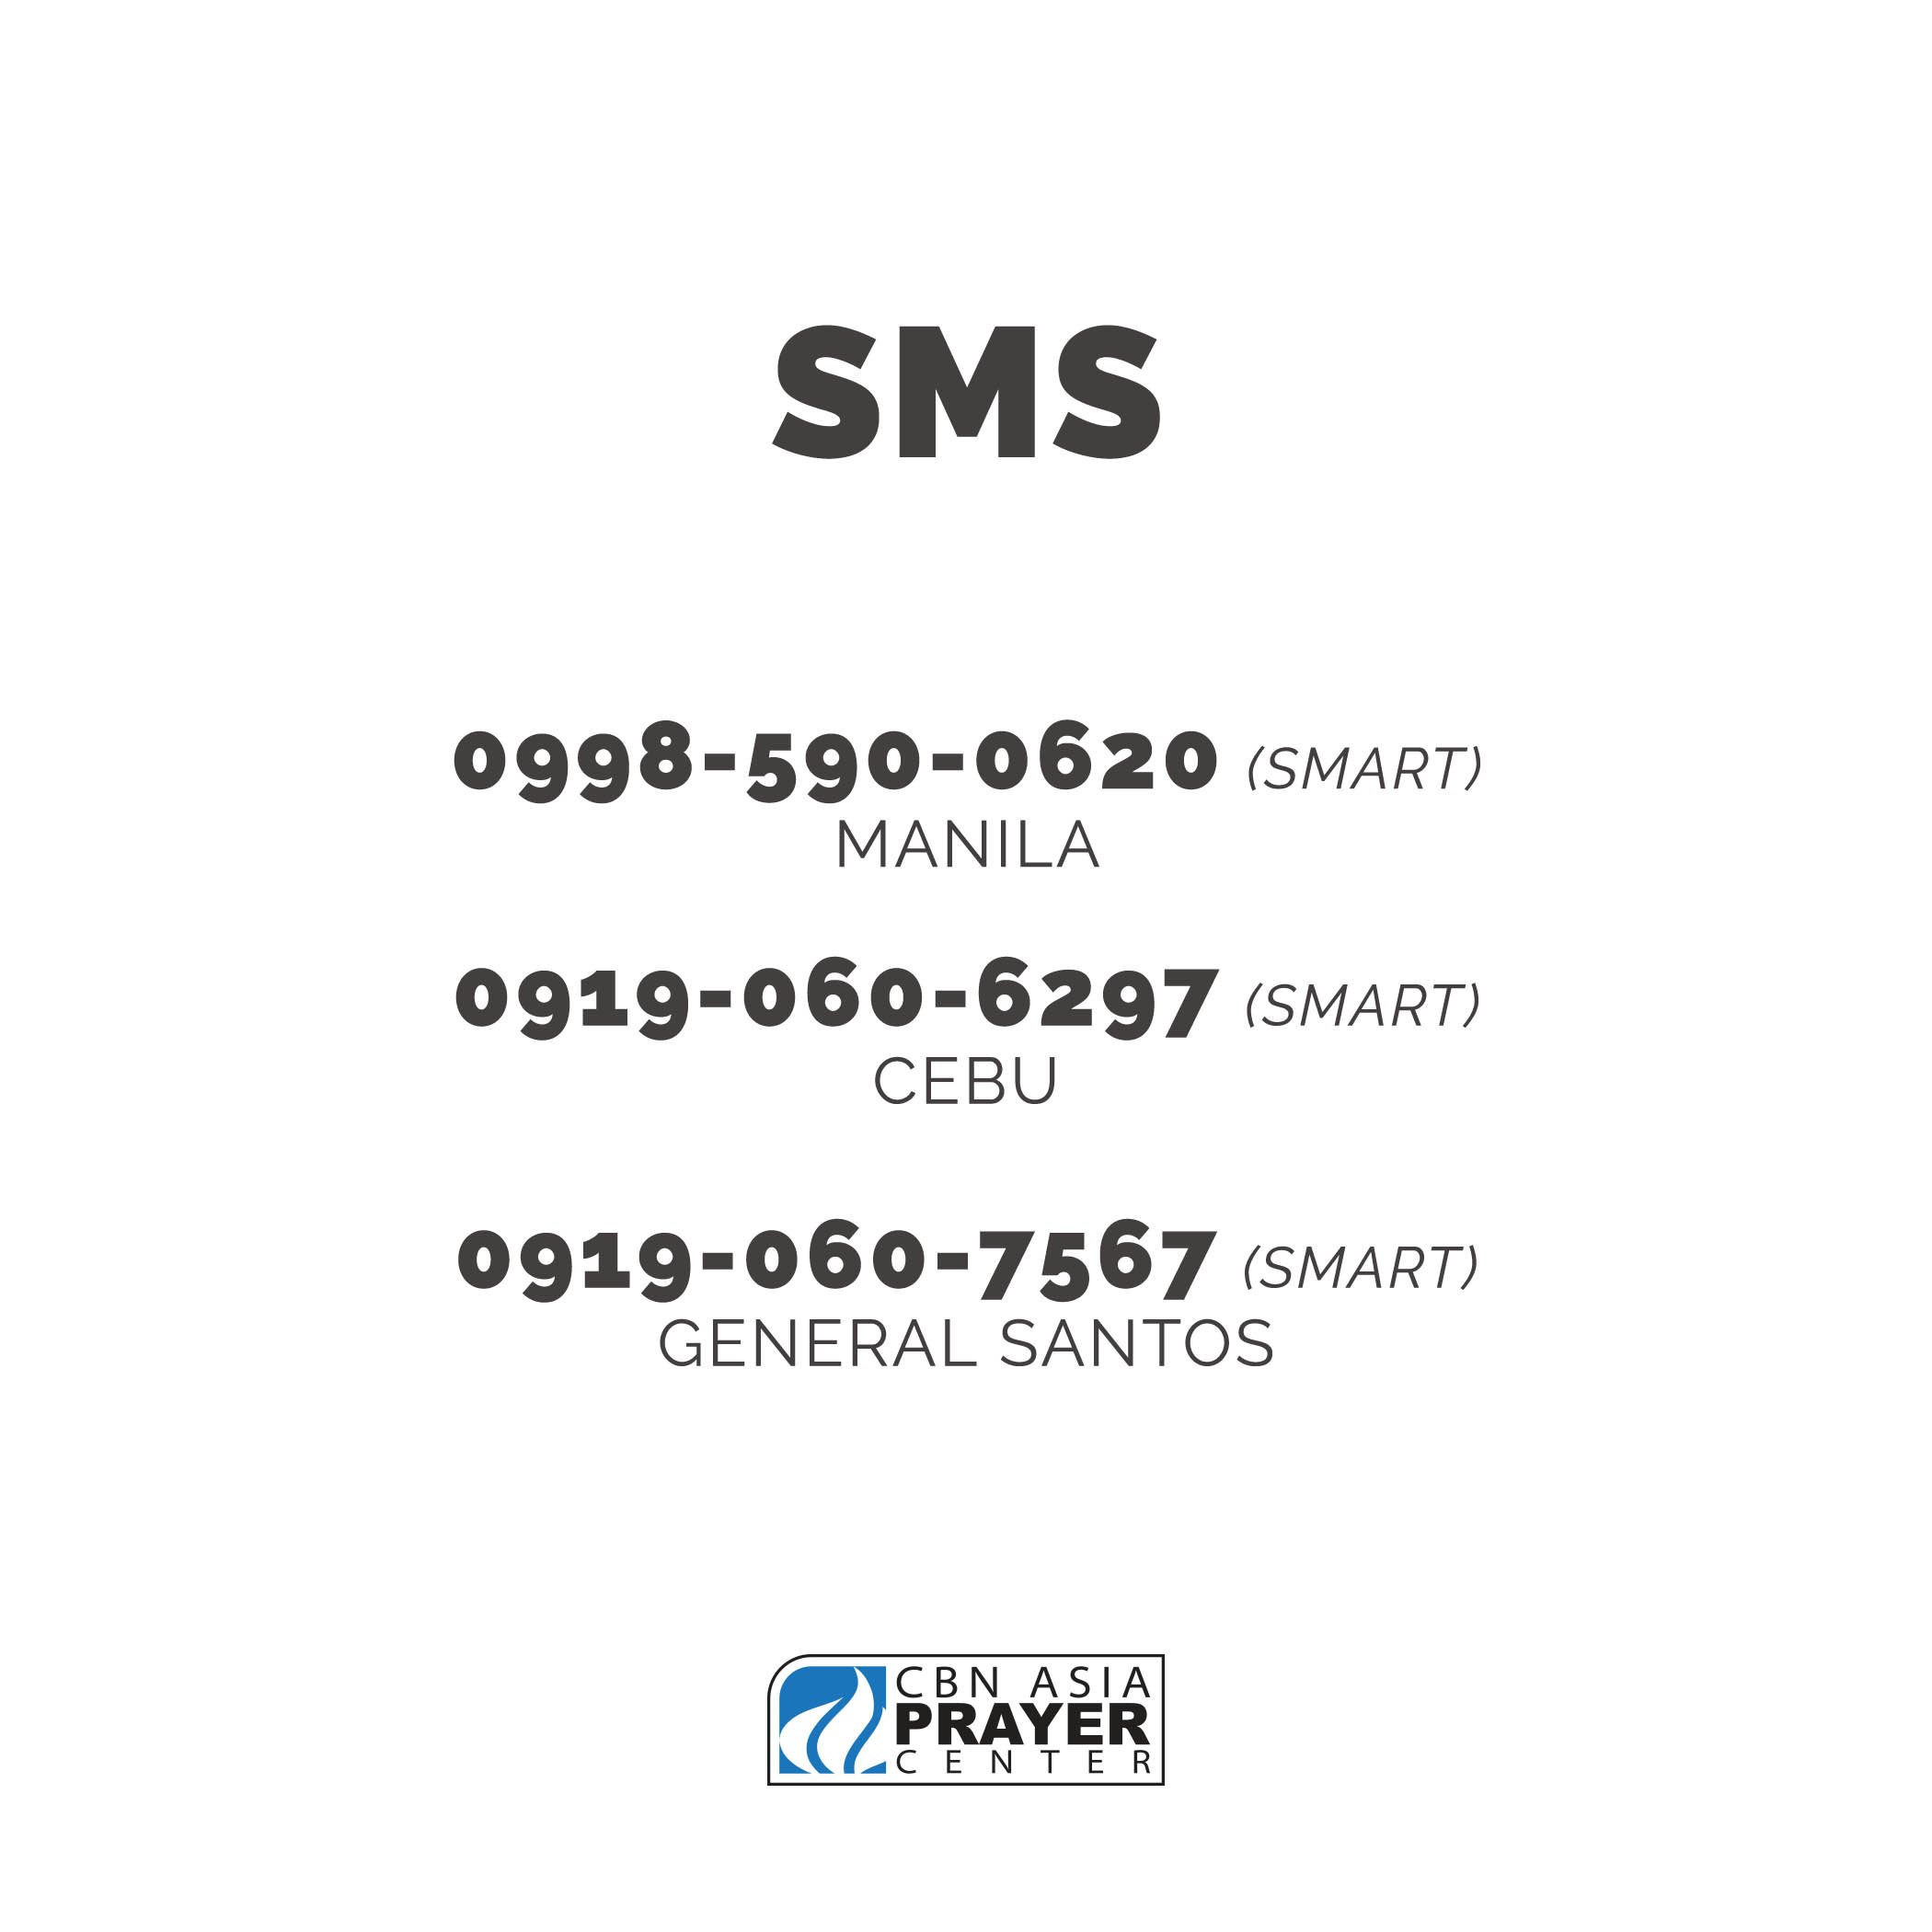 Sms chat 060